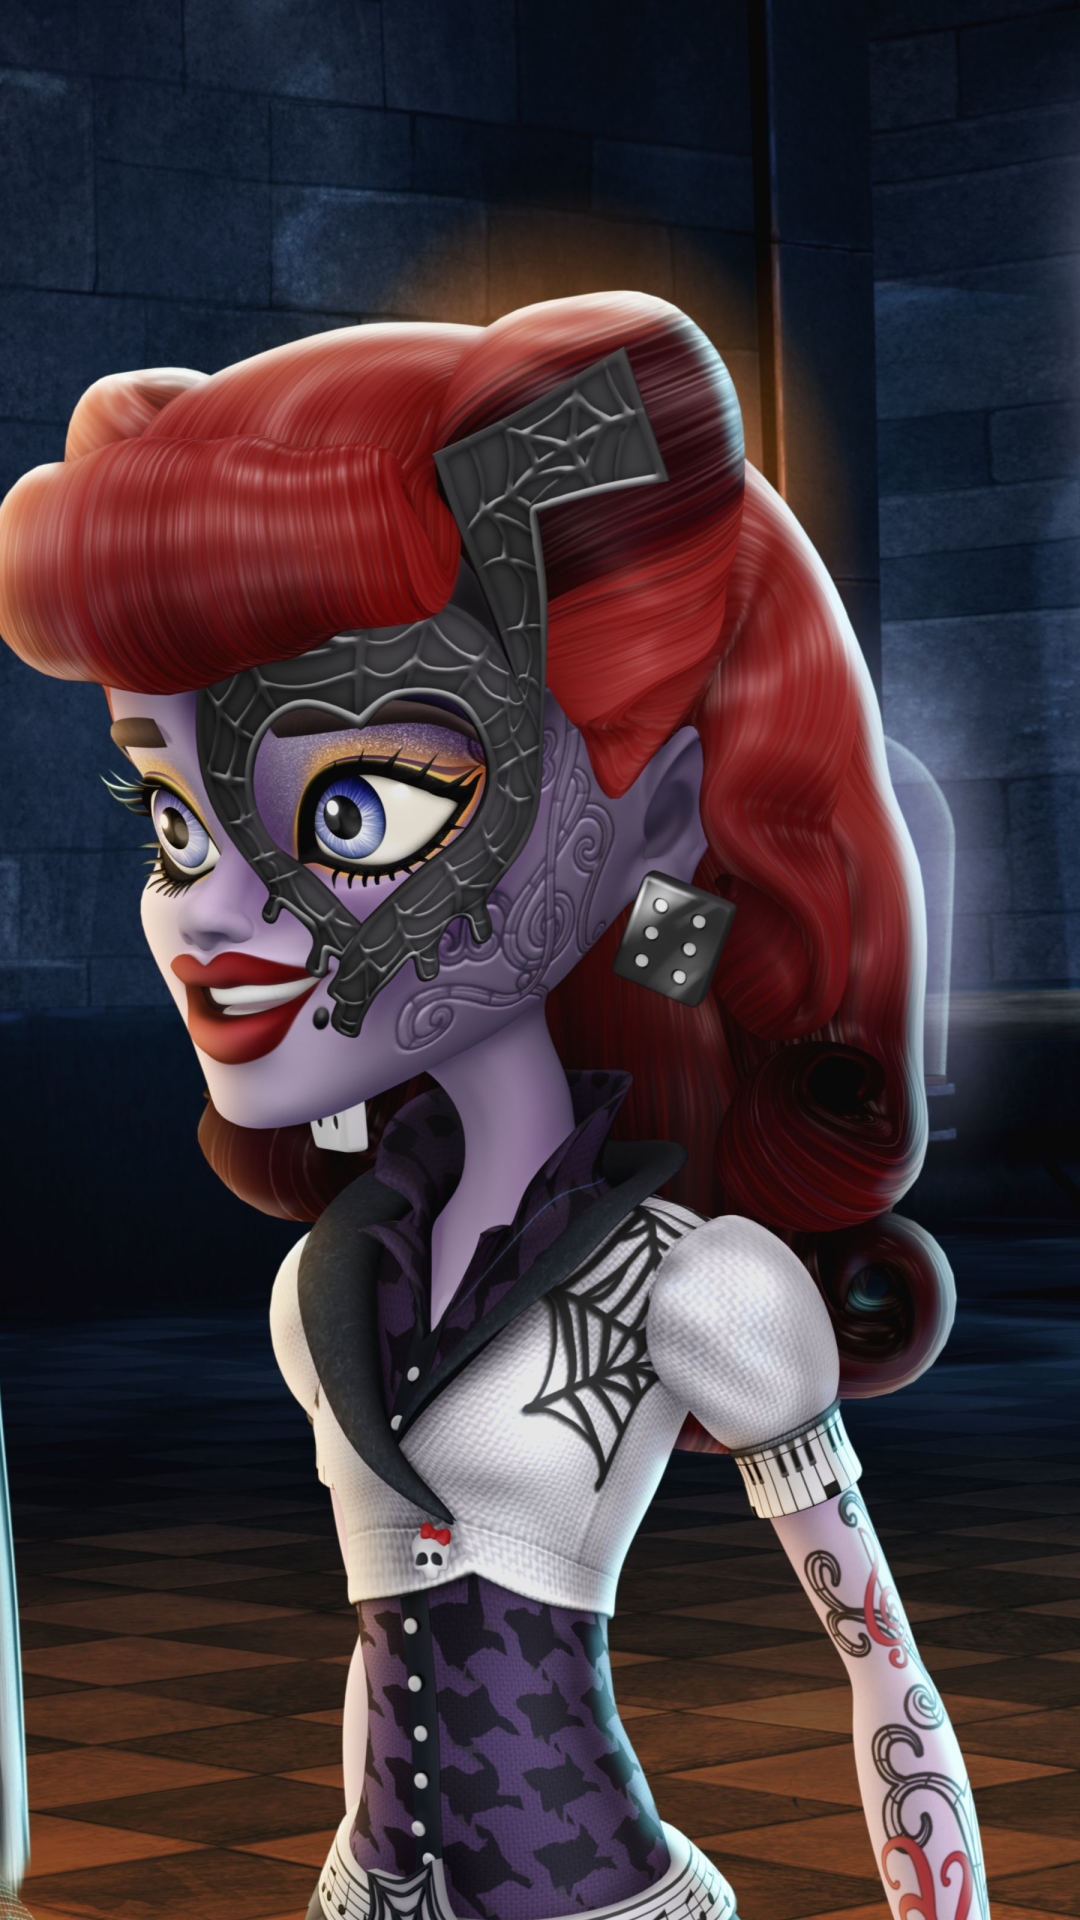 products, monster high: ghouls rule